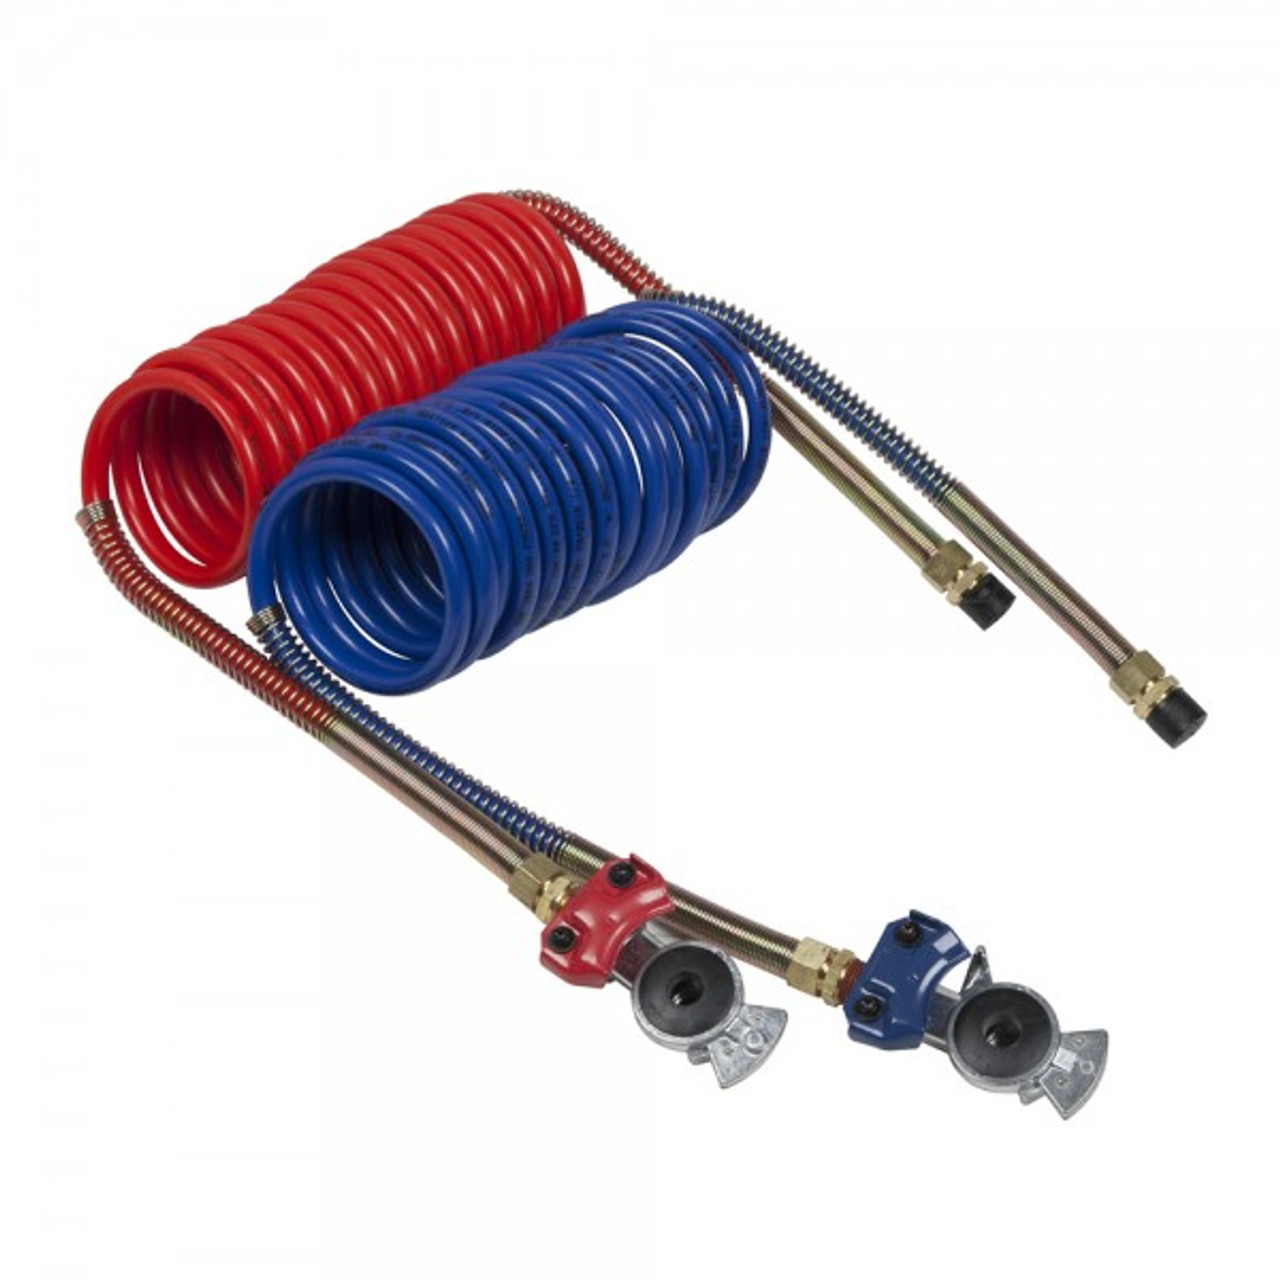 1/2" x 12' @ 2 Pack Red/Blue Recoil Air Hoses w/Red & Blue Gladhands & Male NPT Fittings  81-0012-GH